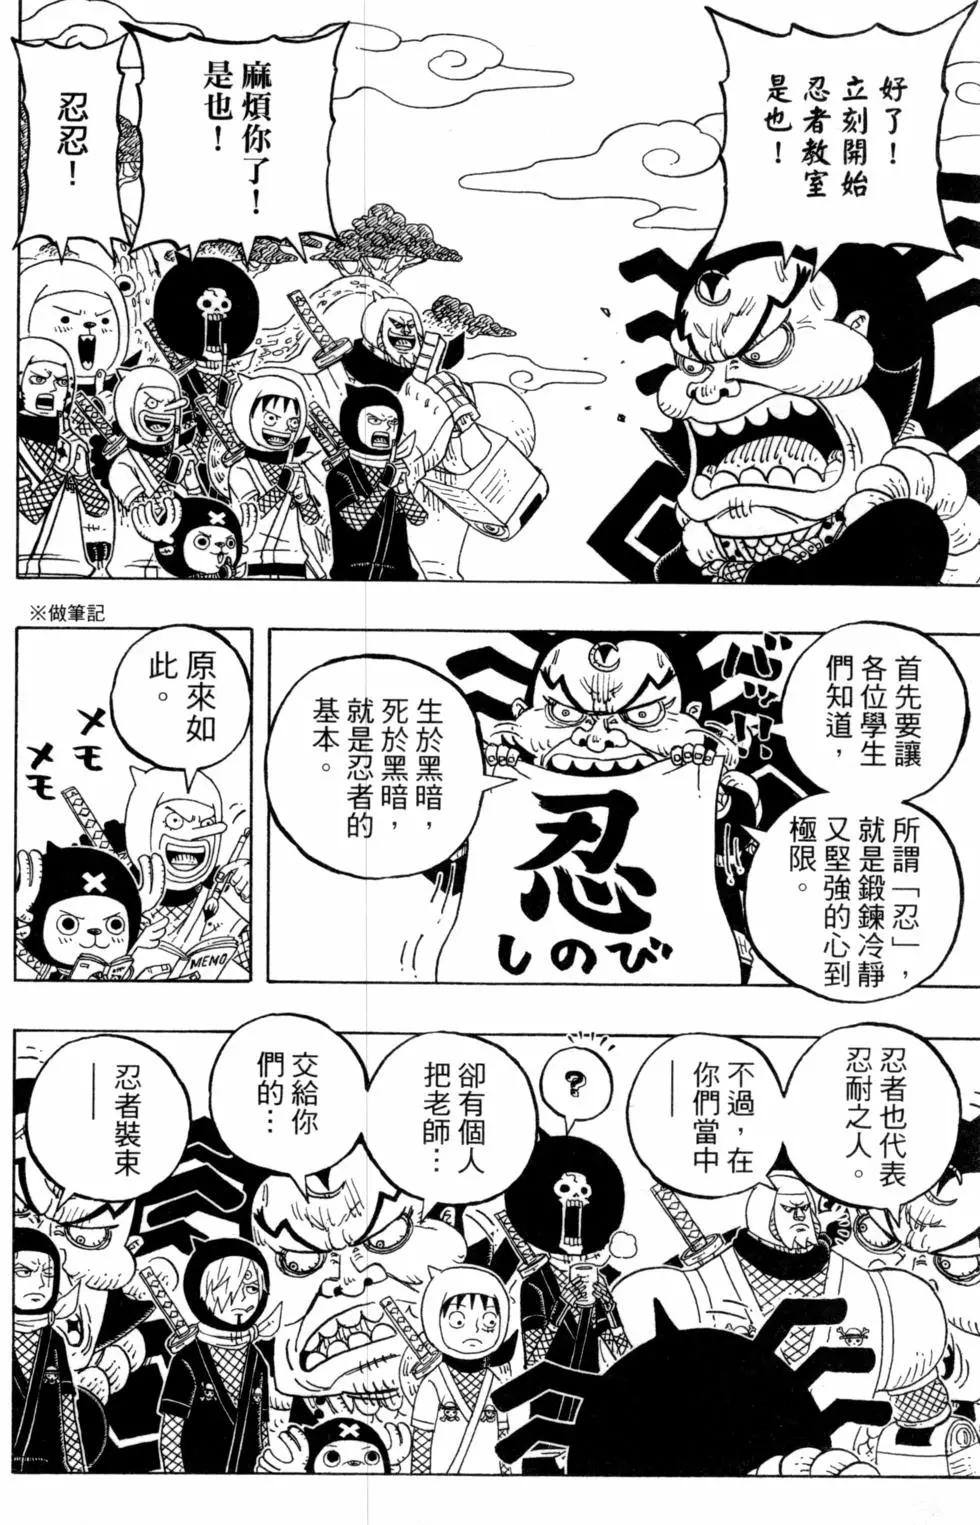 One piece party - 第06卷(1/4) - 5